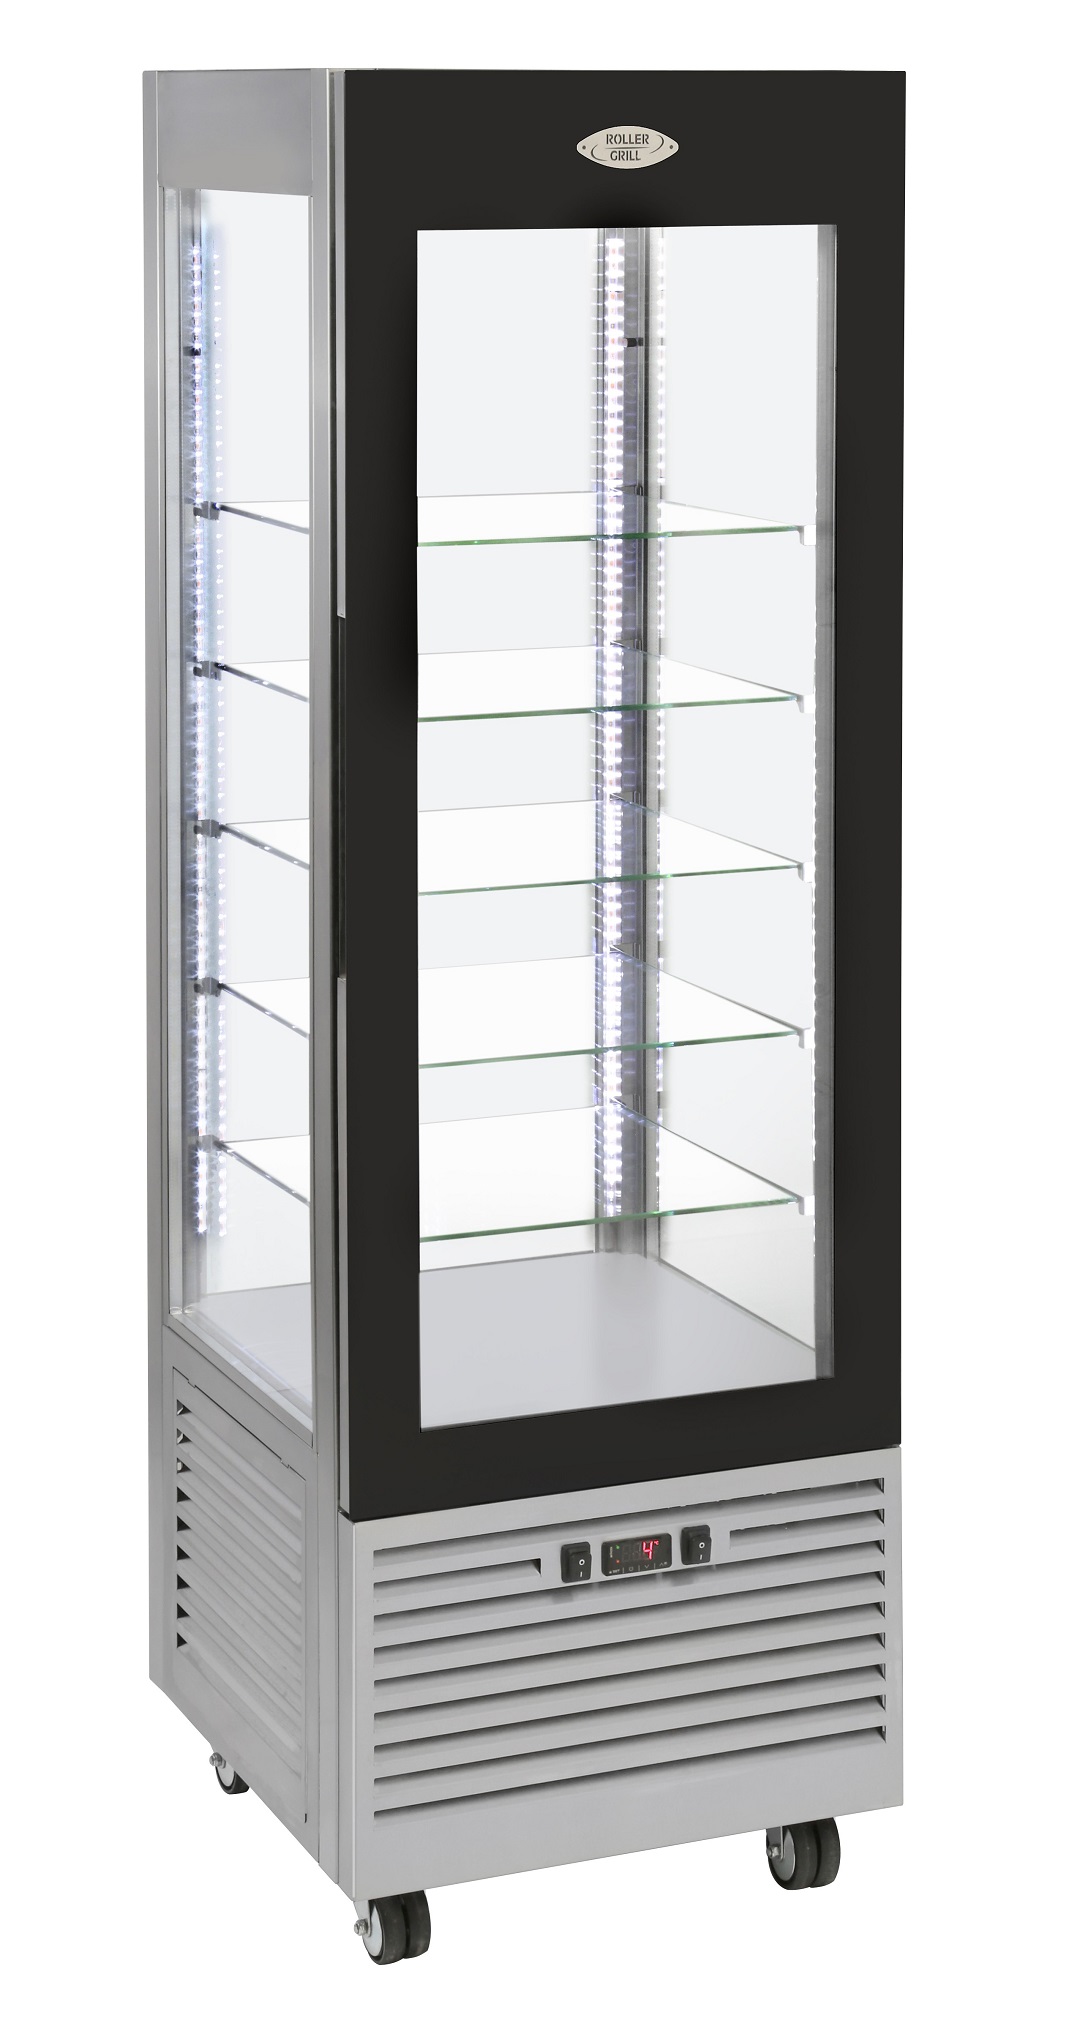 Roller Grill RD 600 F Vertical Refrigerated Display Cabinet